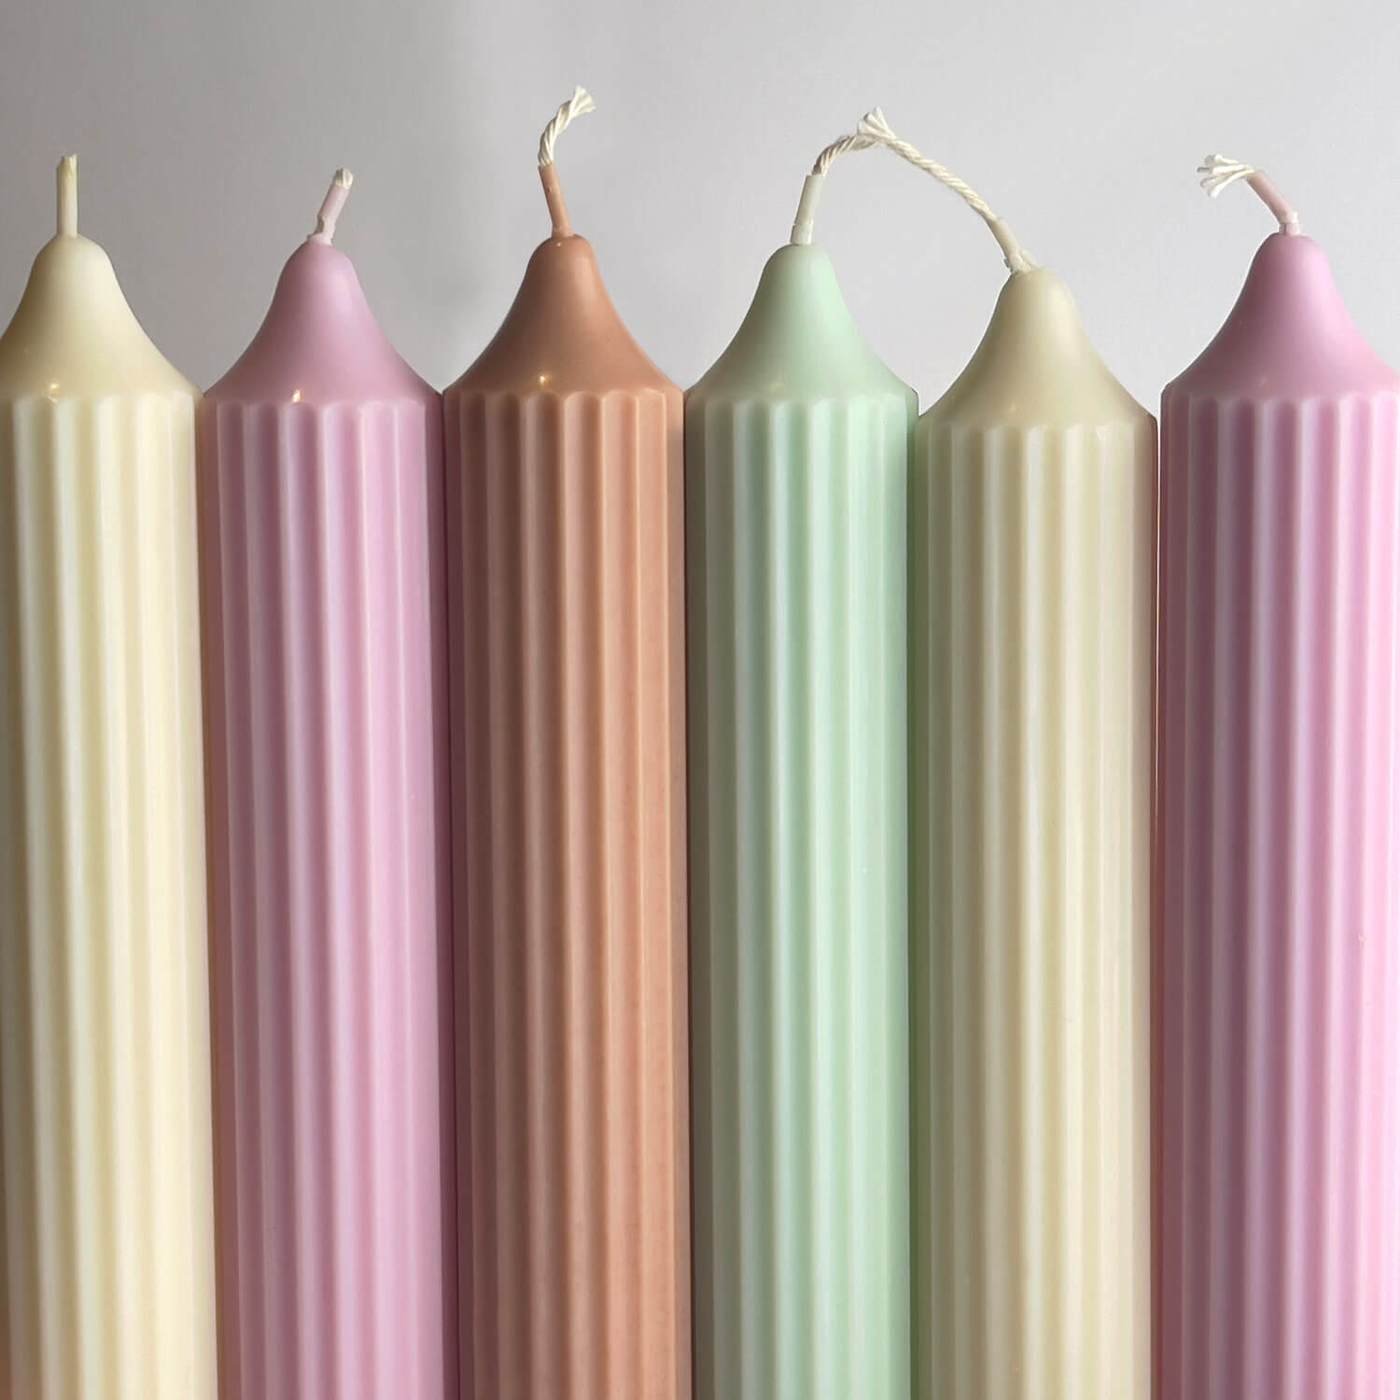 London Tall Pillar Candle - Available in 3 Colours